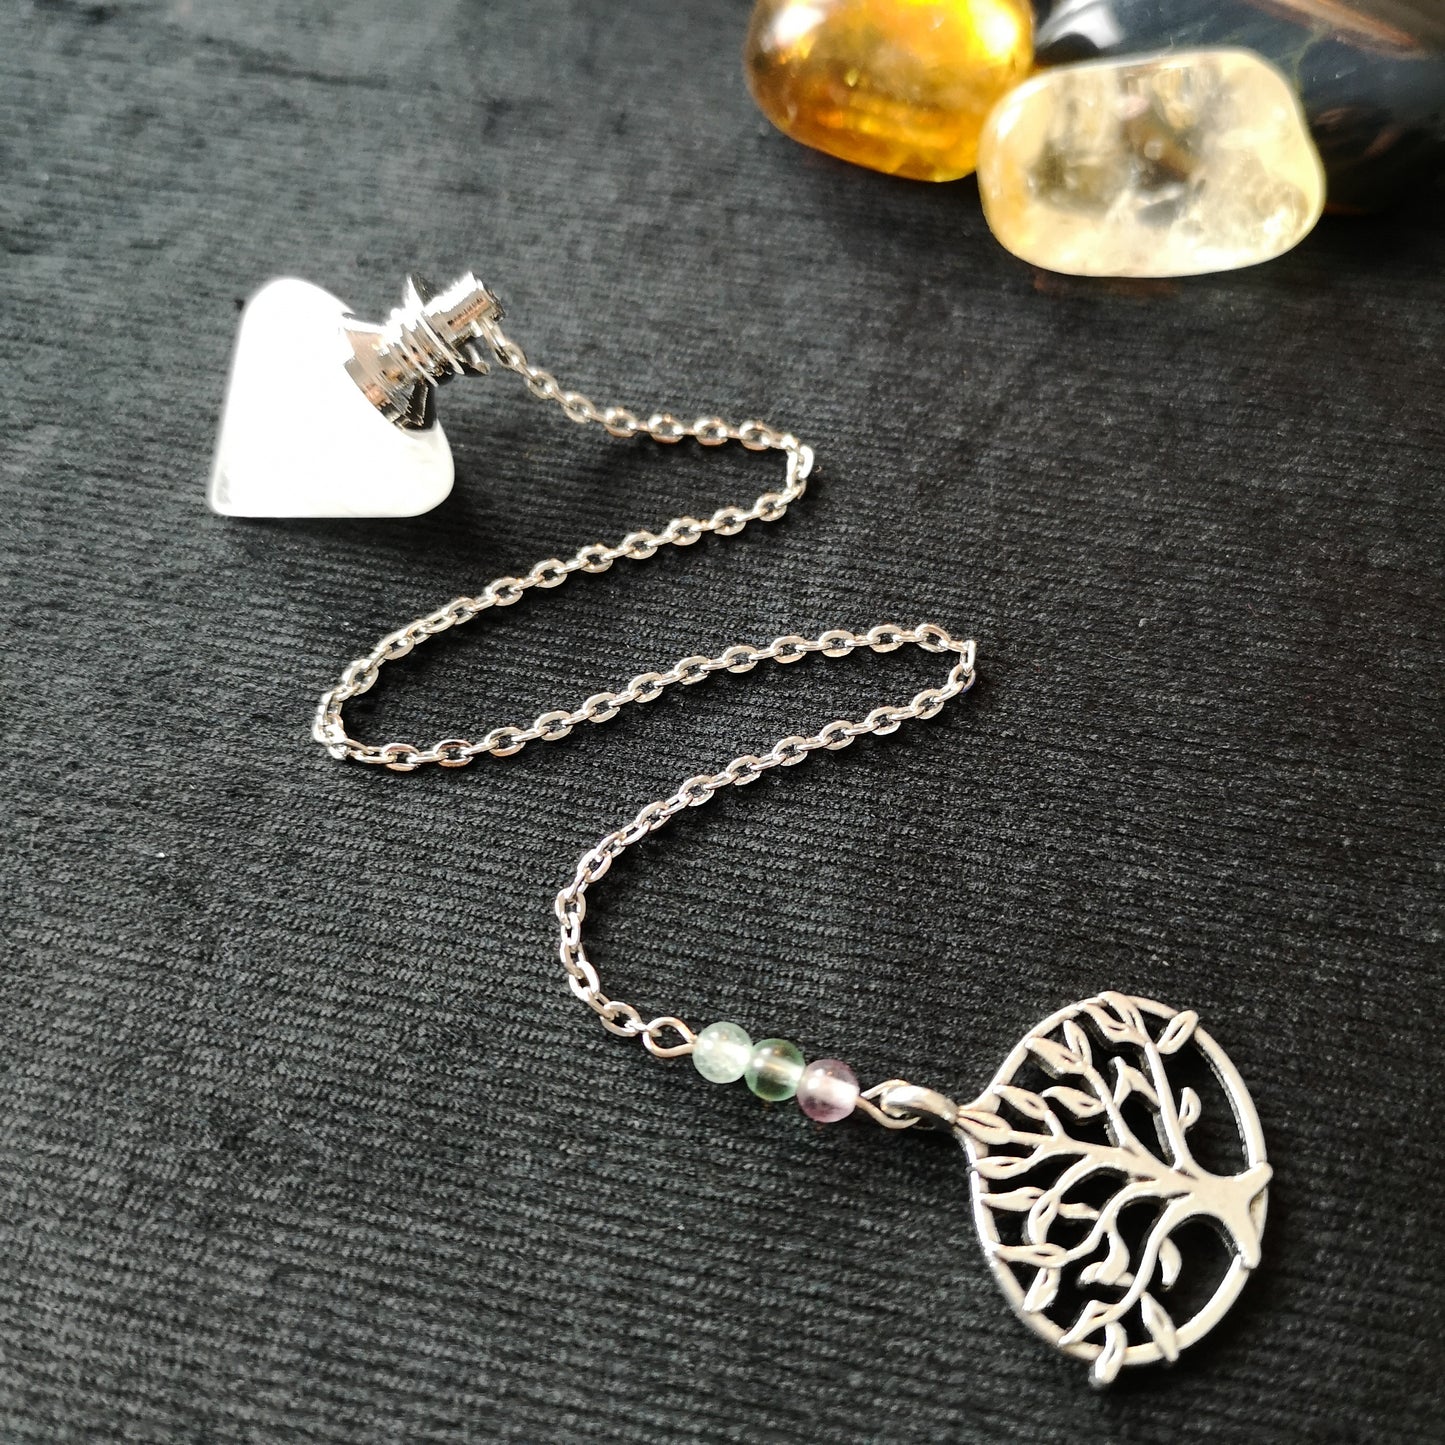 Clear quartz, fluorite and tree of life conical dowsing pendulum - The French Witch shop